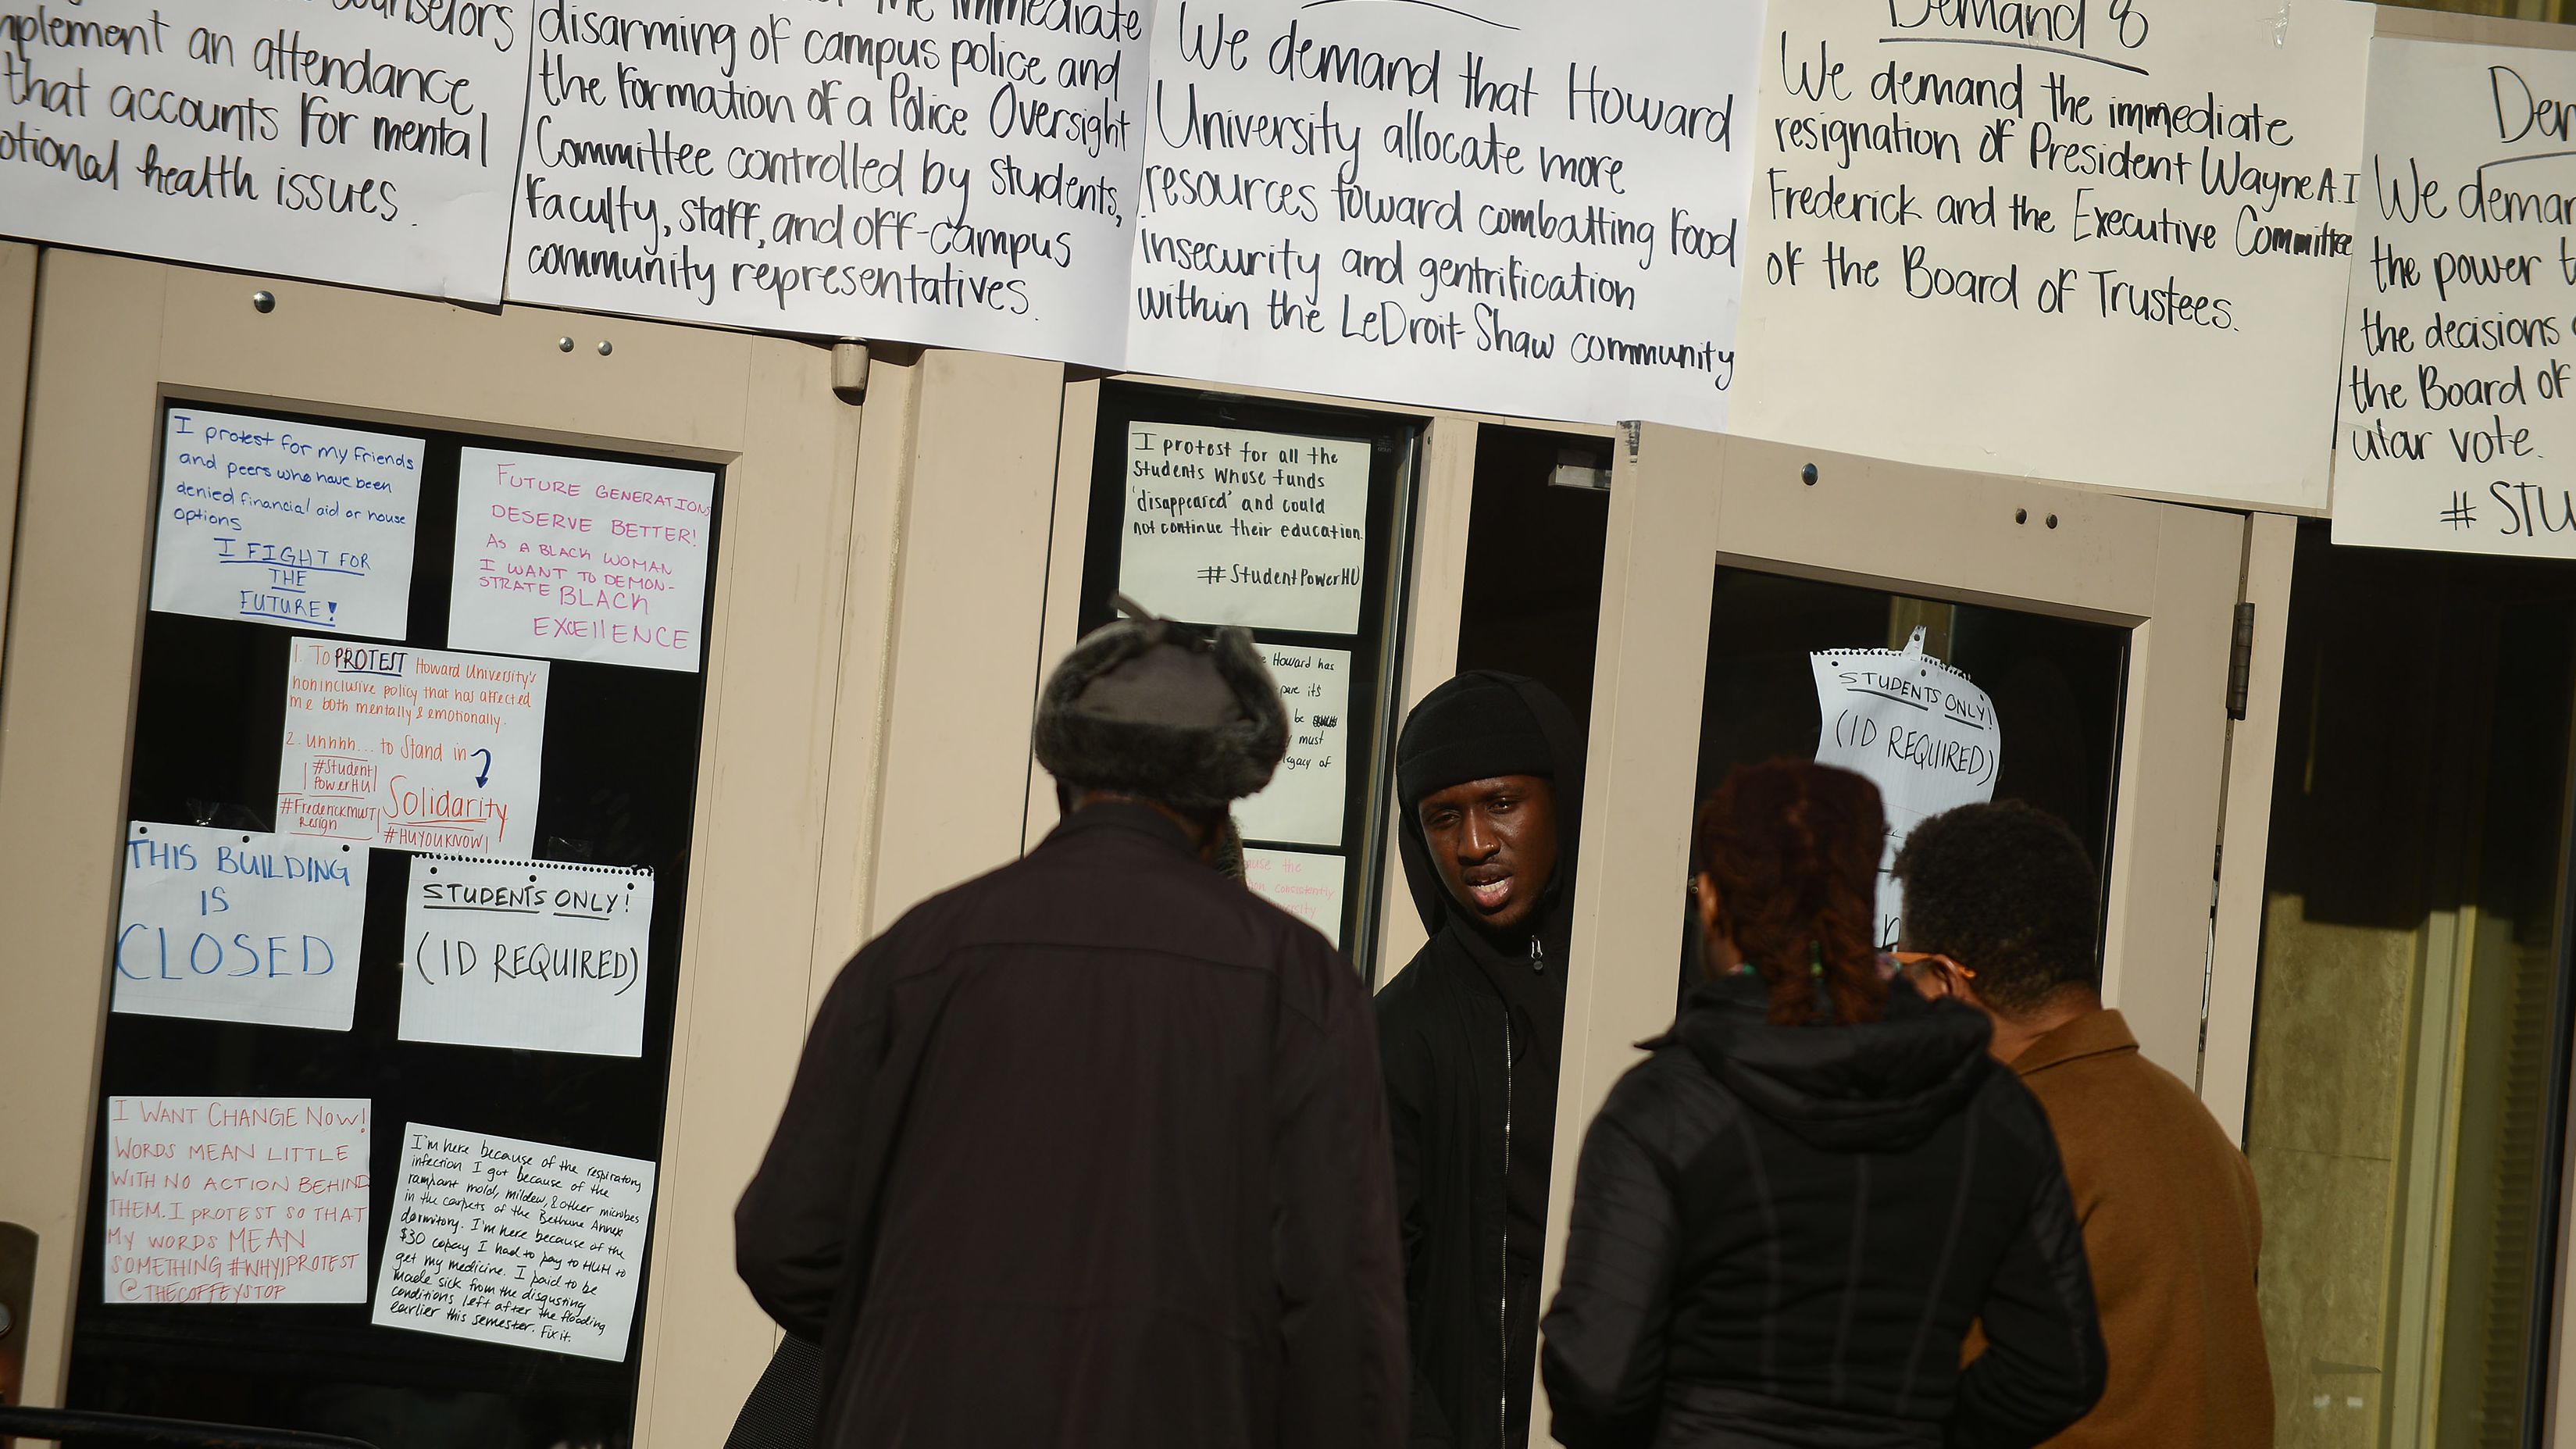 Students occupied the administration building on campus of Howard University to protest the university's policies, tuition hikes and neglect of student affairs. 